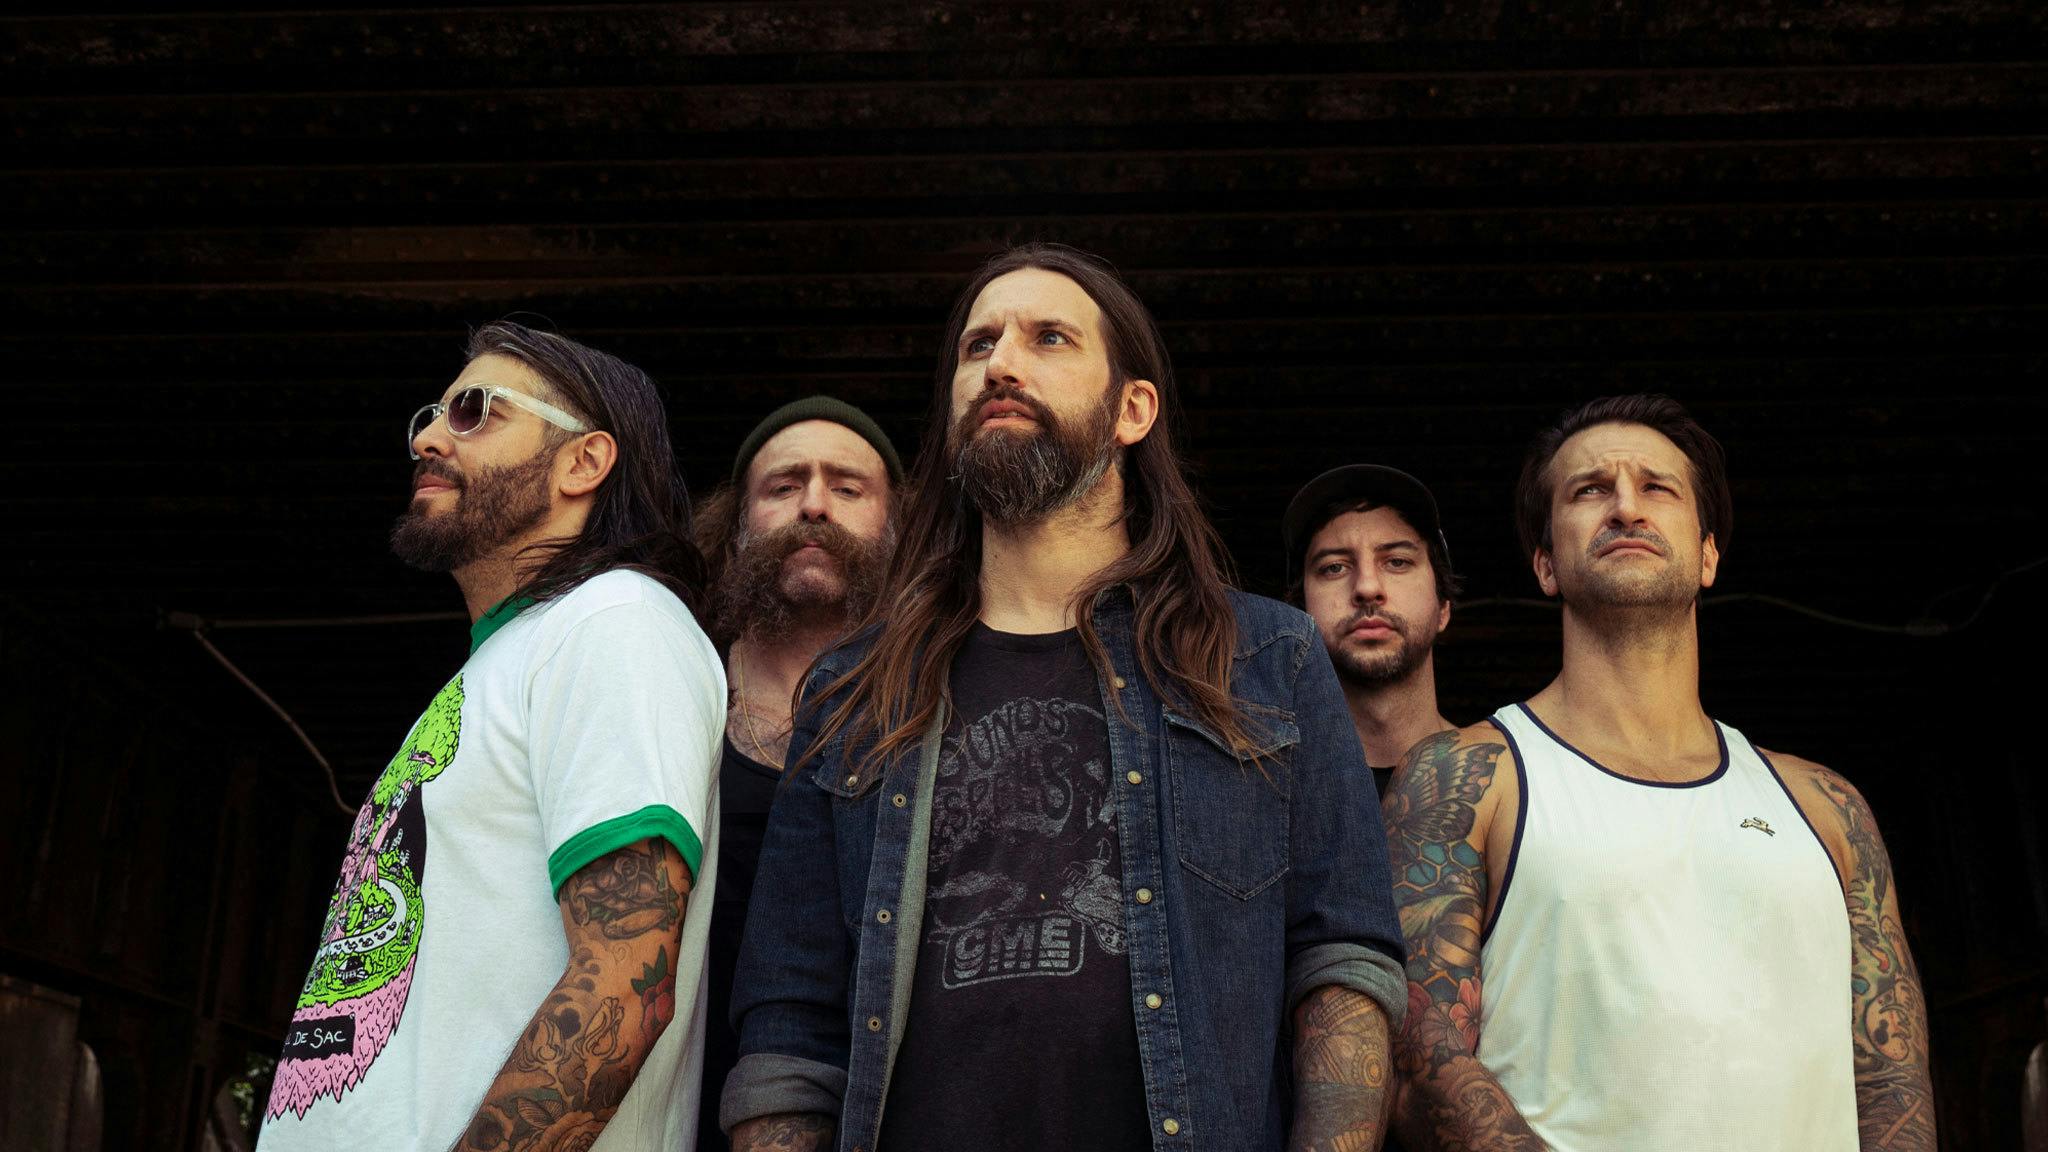 Every Time I Die have cancelled their UK tour